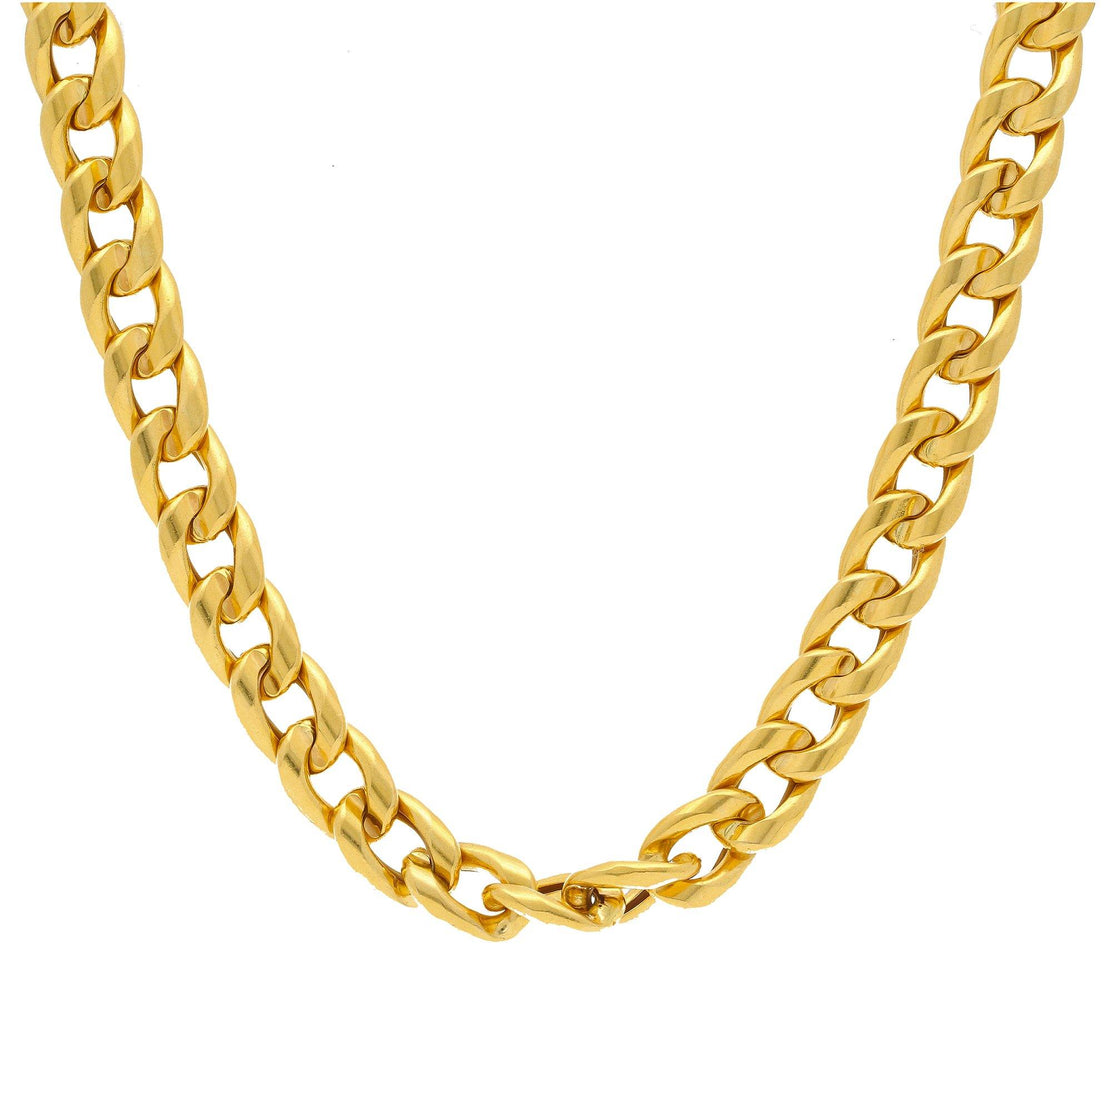 Gold Link Necklace - Our Tesoro Custom Jewelry-vachngandaiphat.com.vn